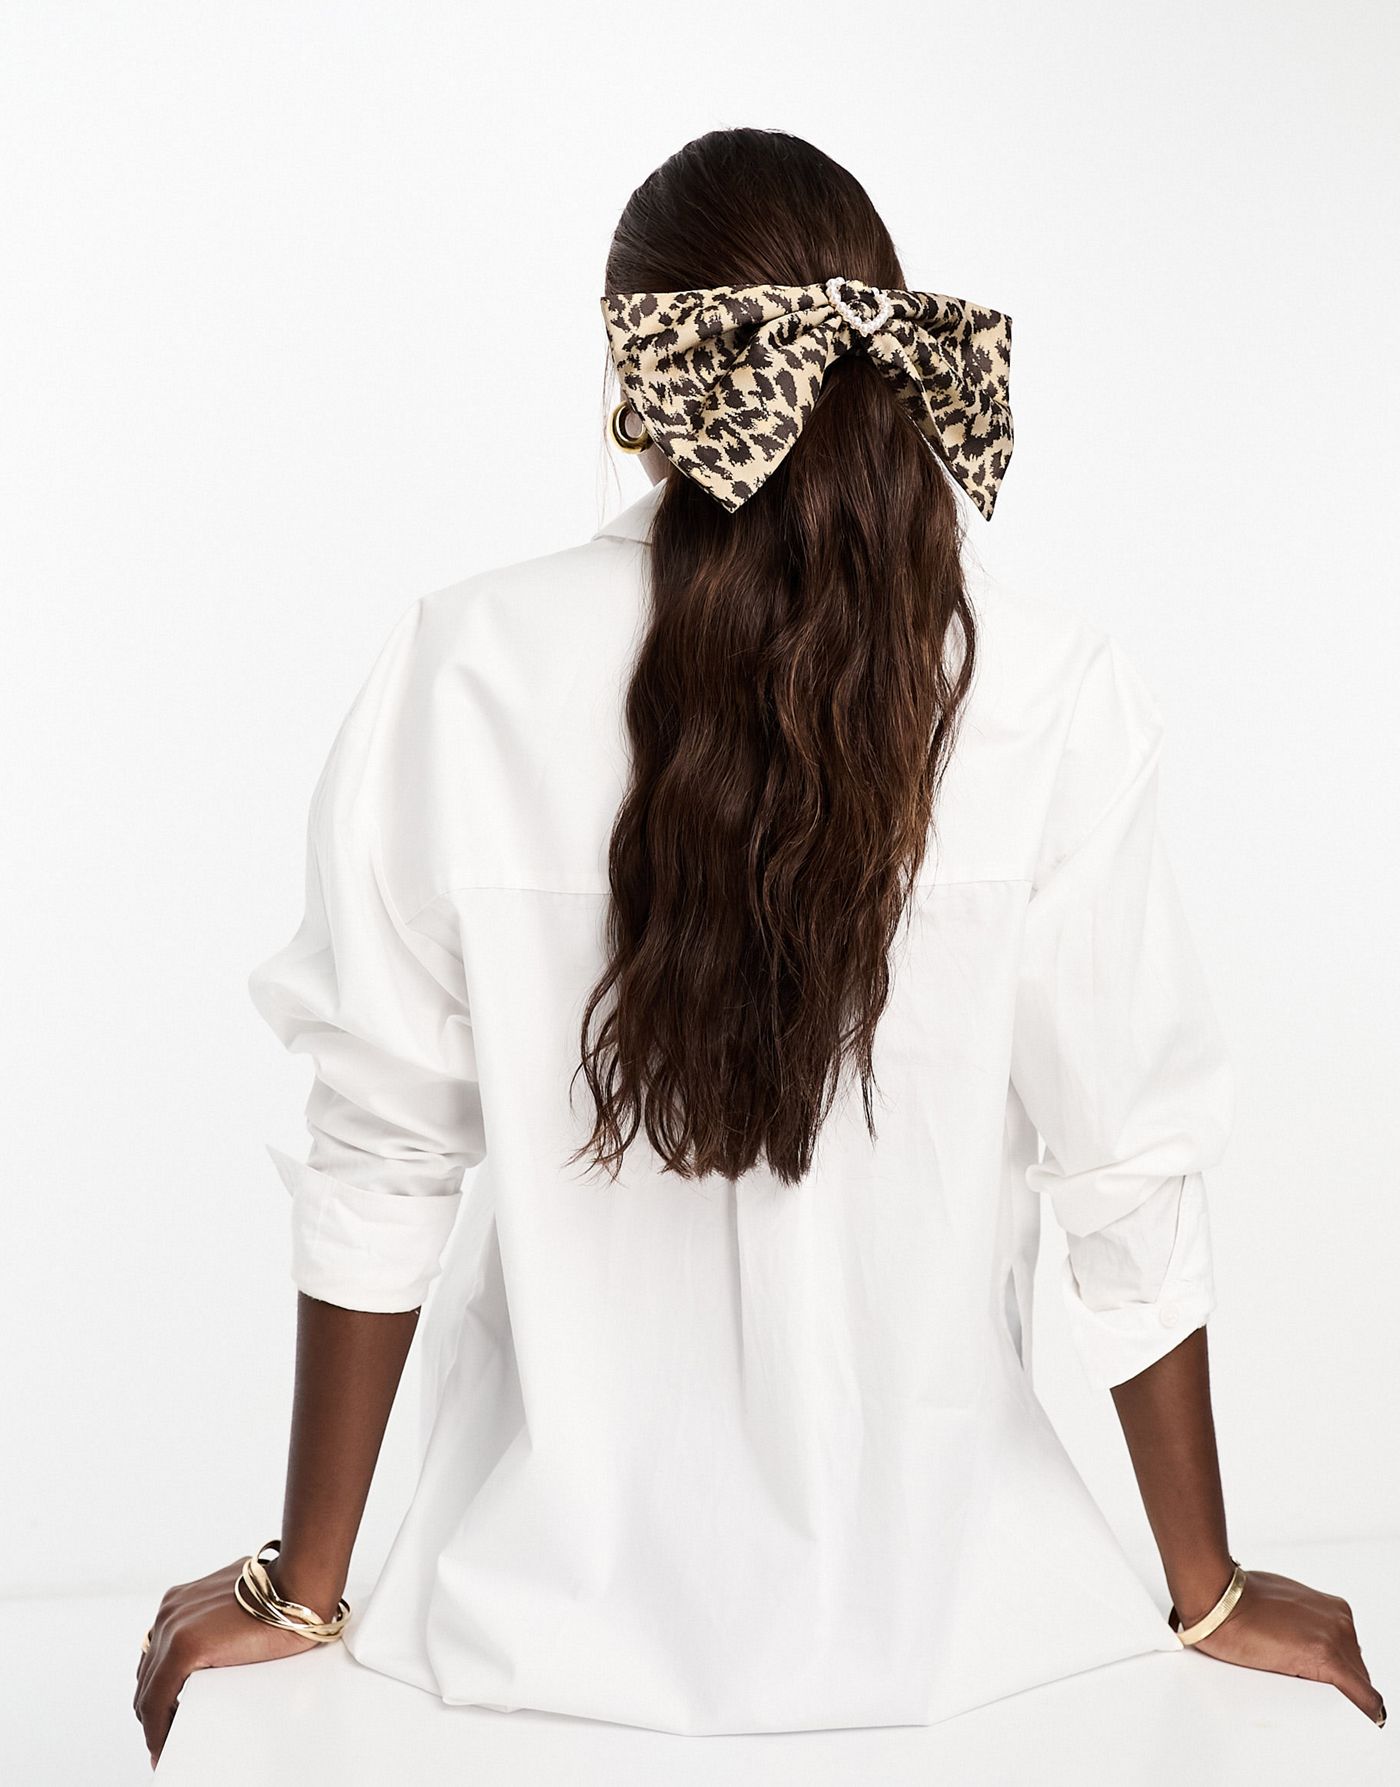 Sister Jane oversized bow hair clip in leopard print